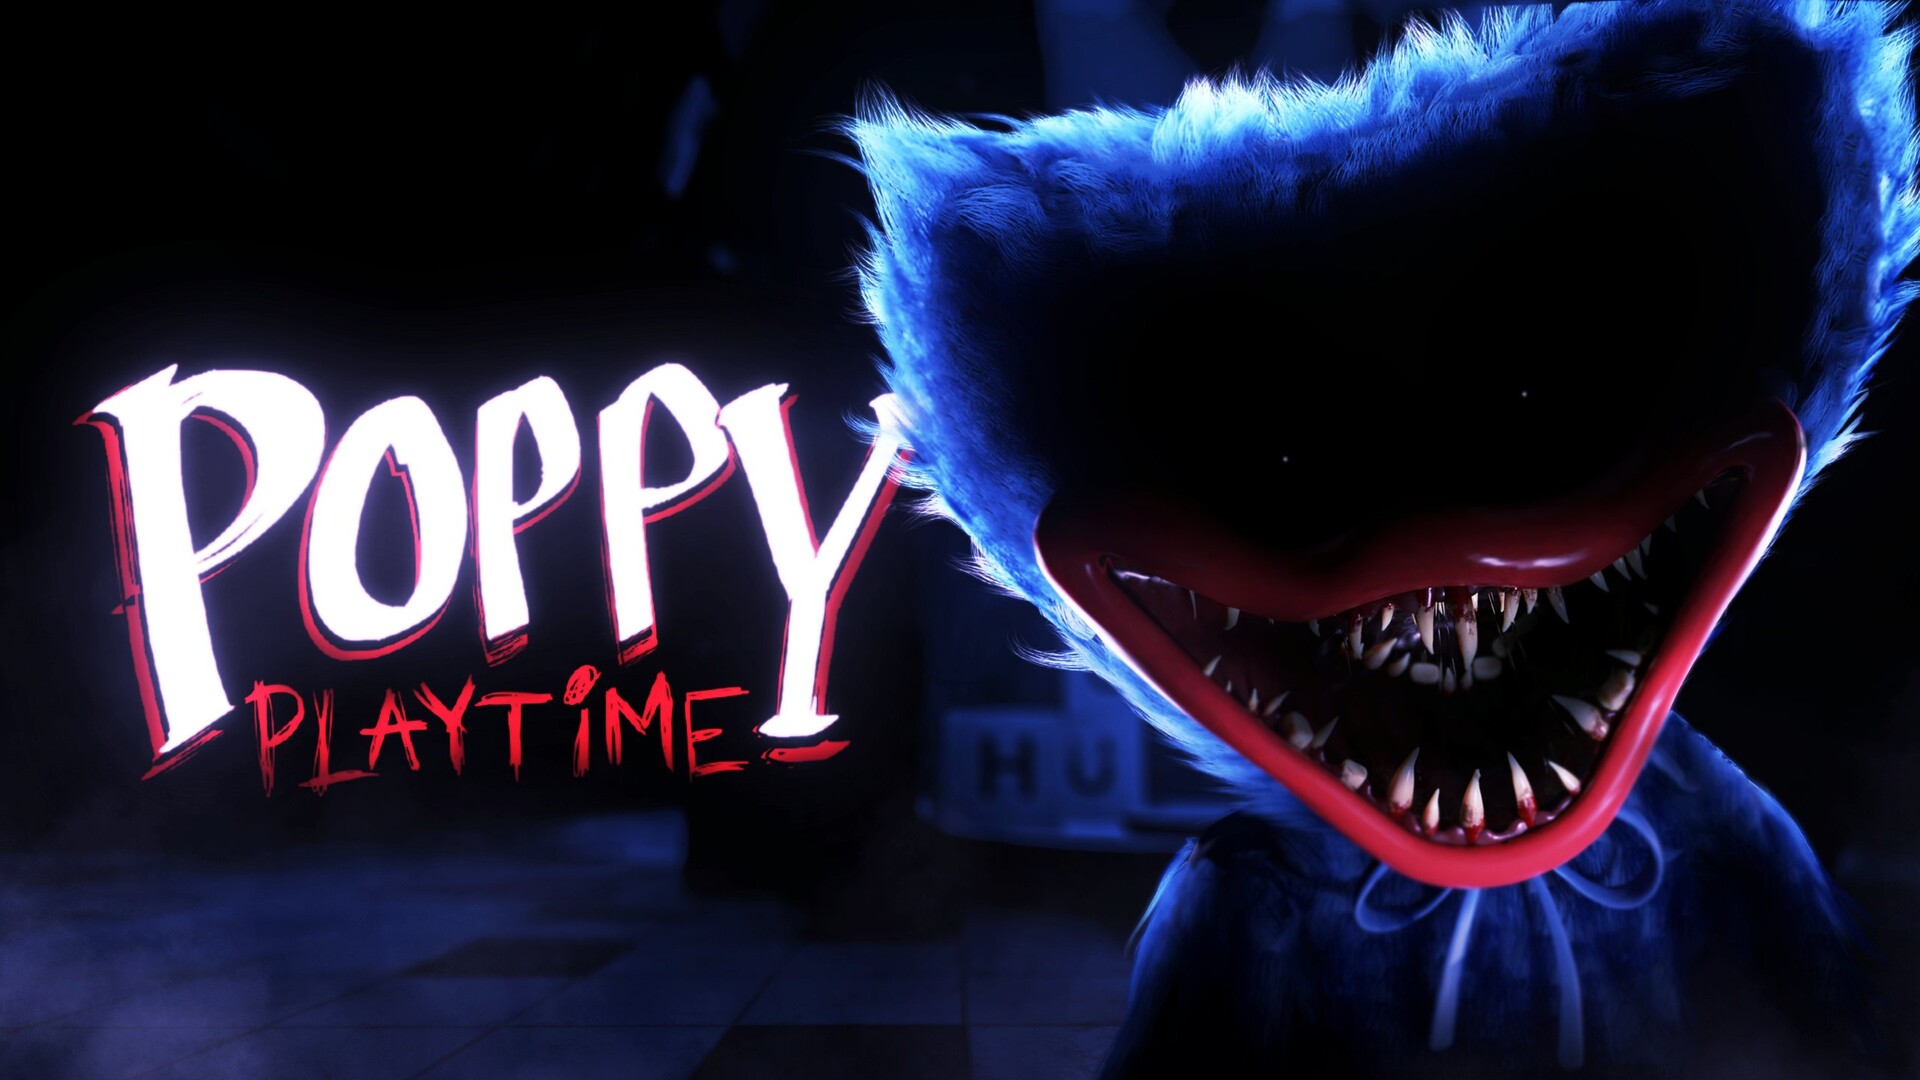 Download and play Poppy Playtime Wallpaper Fans on PC with MuMu Player